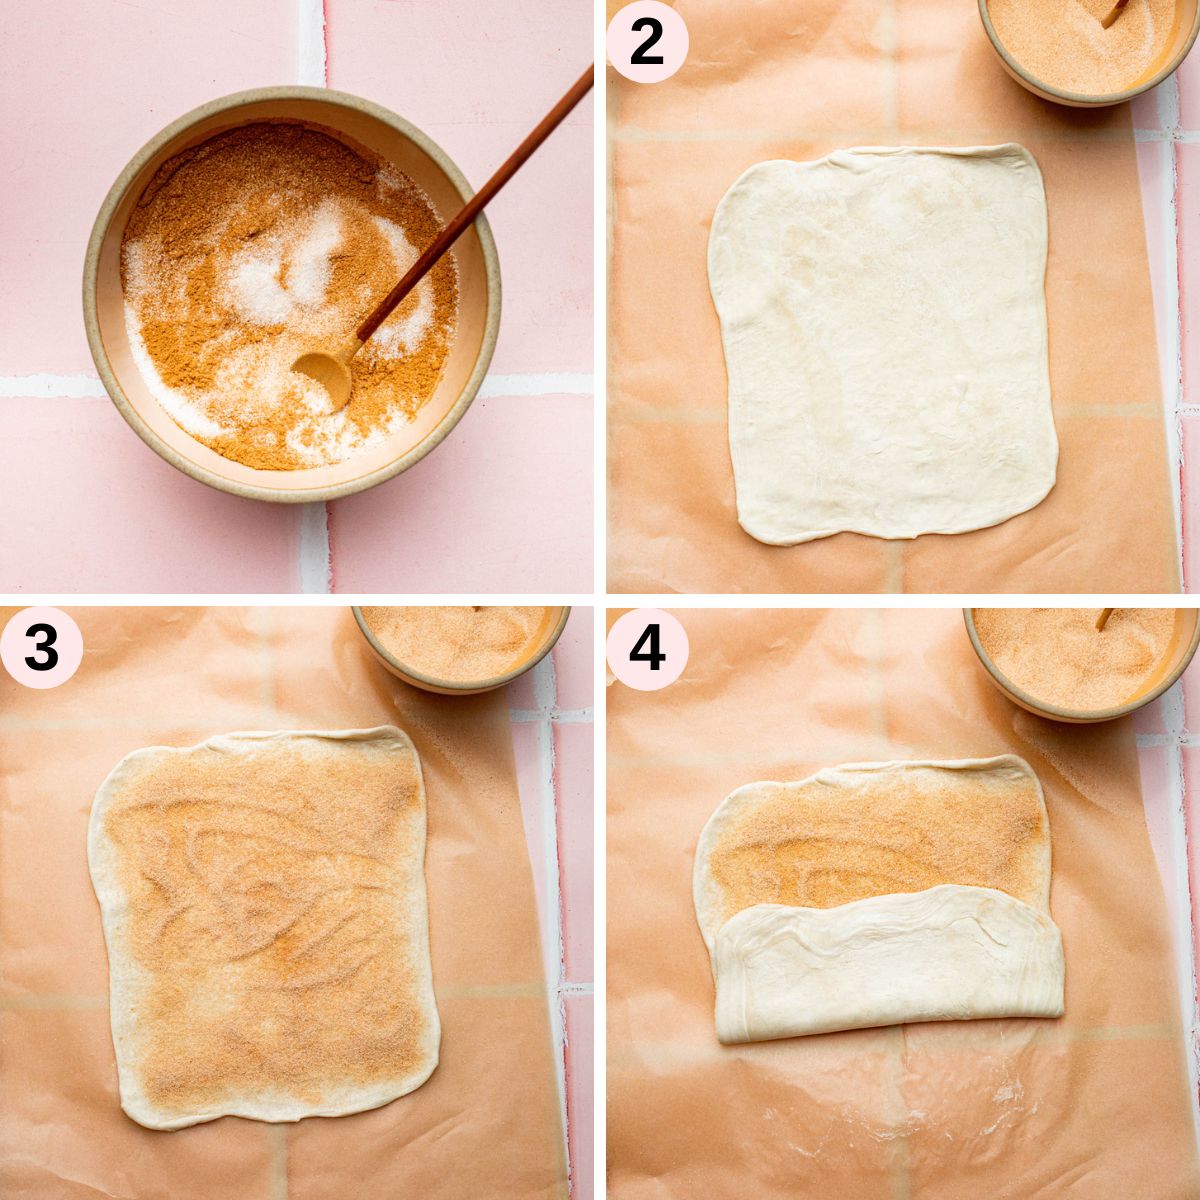 Puff pastry cinnamon twists steps 1 to 4.